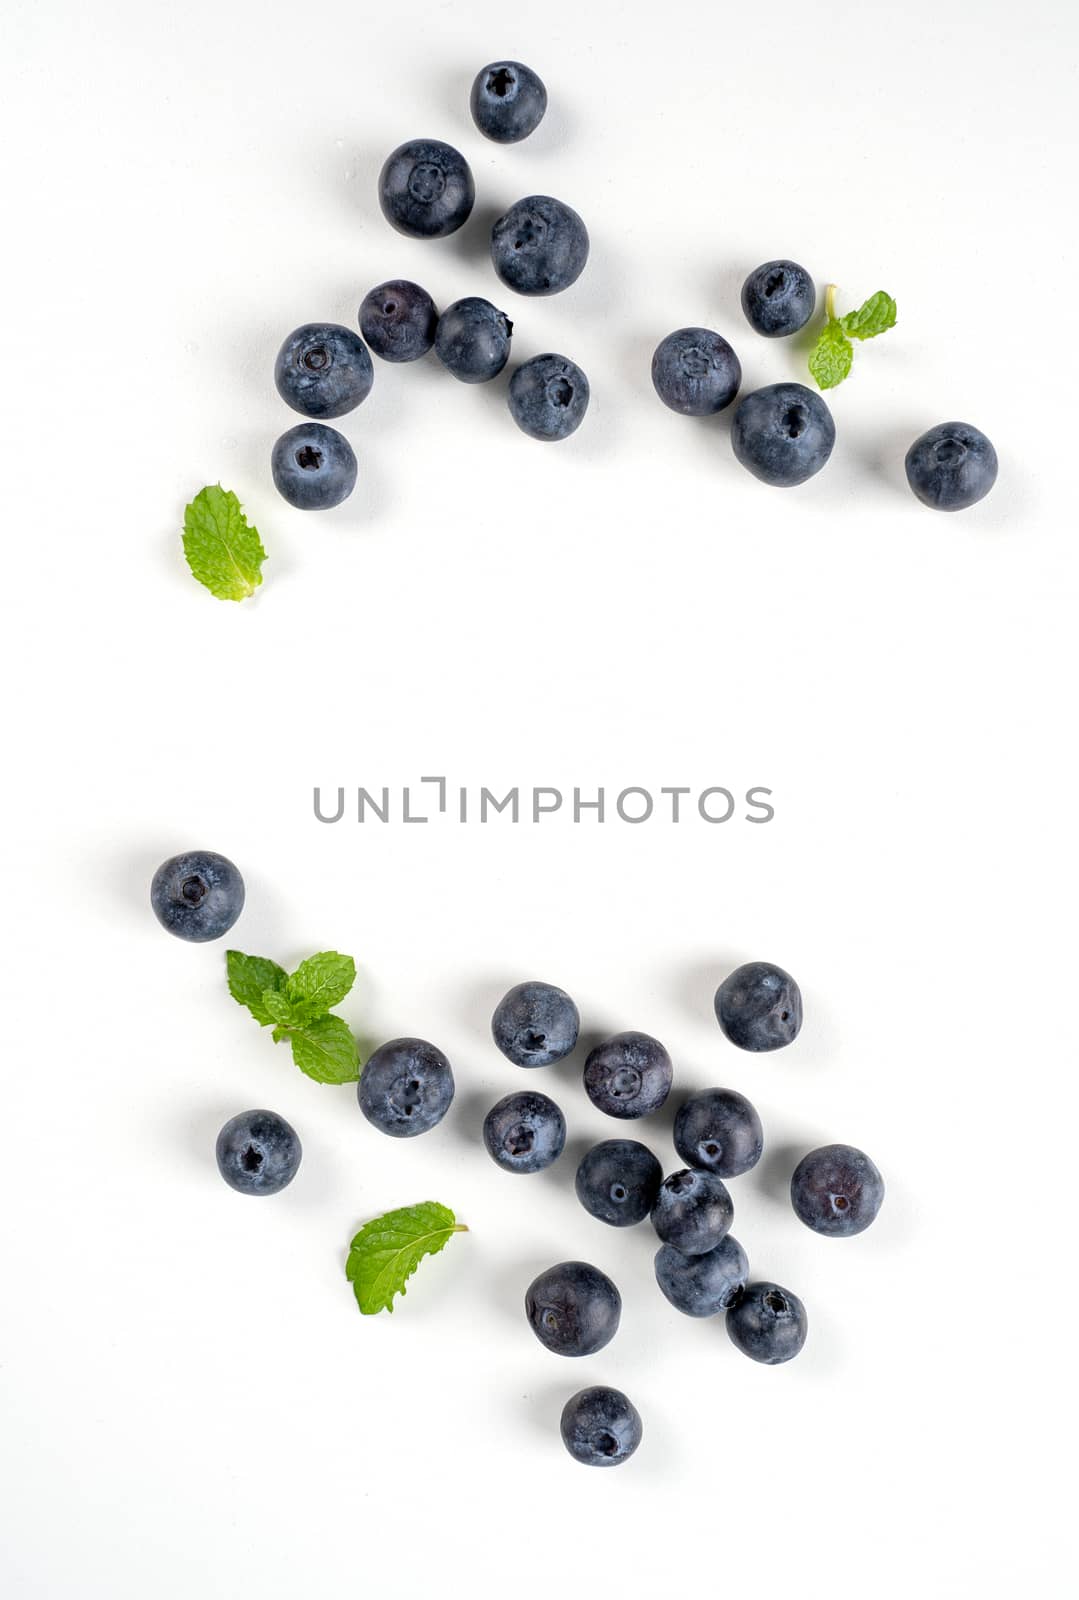 Blueberry fruit top view isolated on a white background, flat la by ROMIXIMAGE